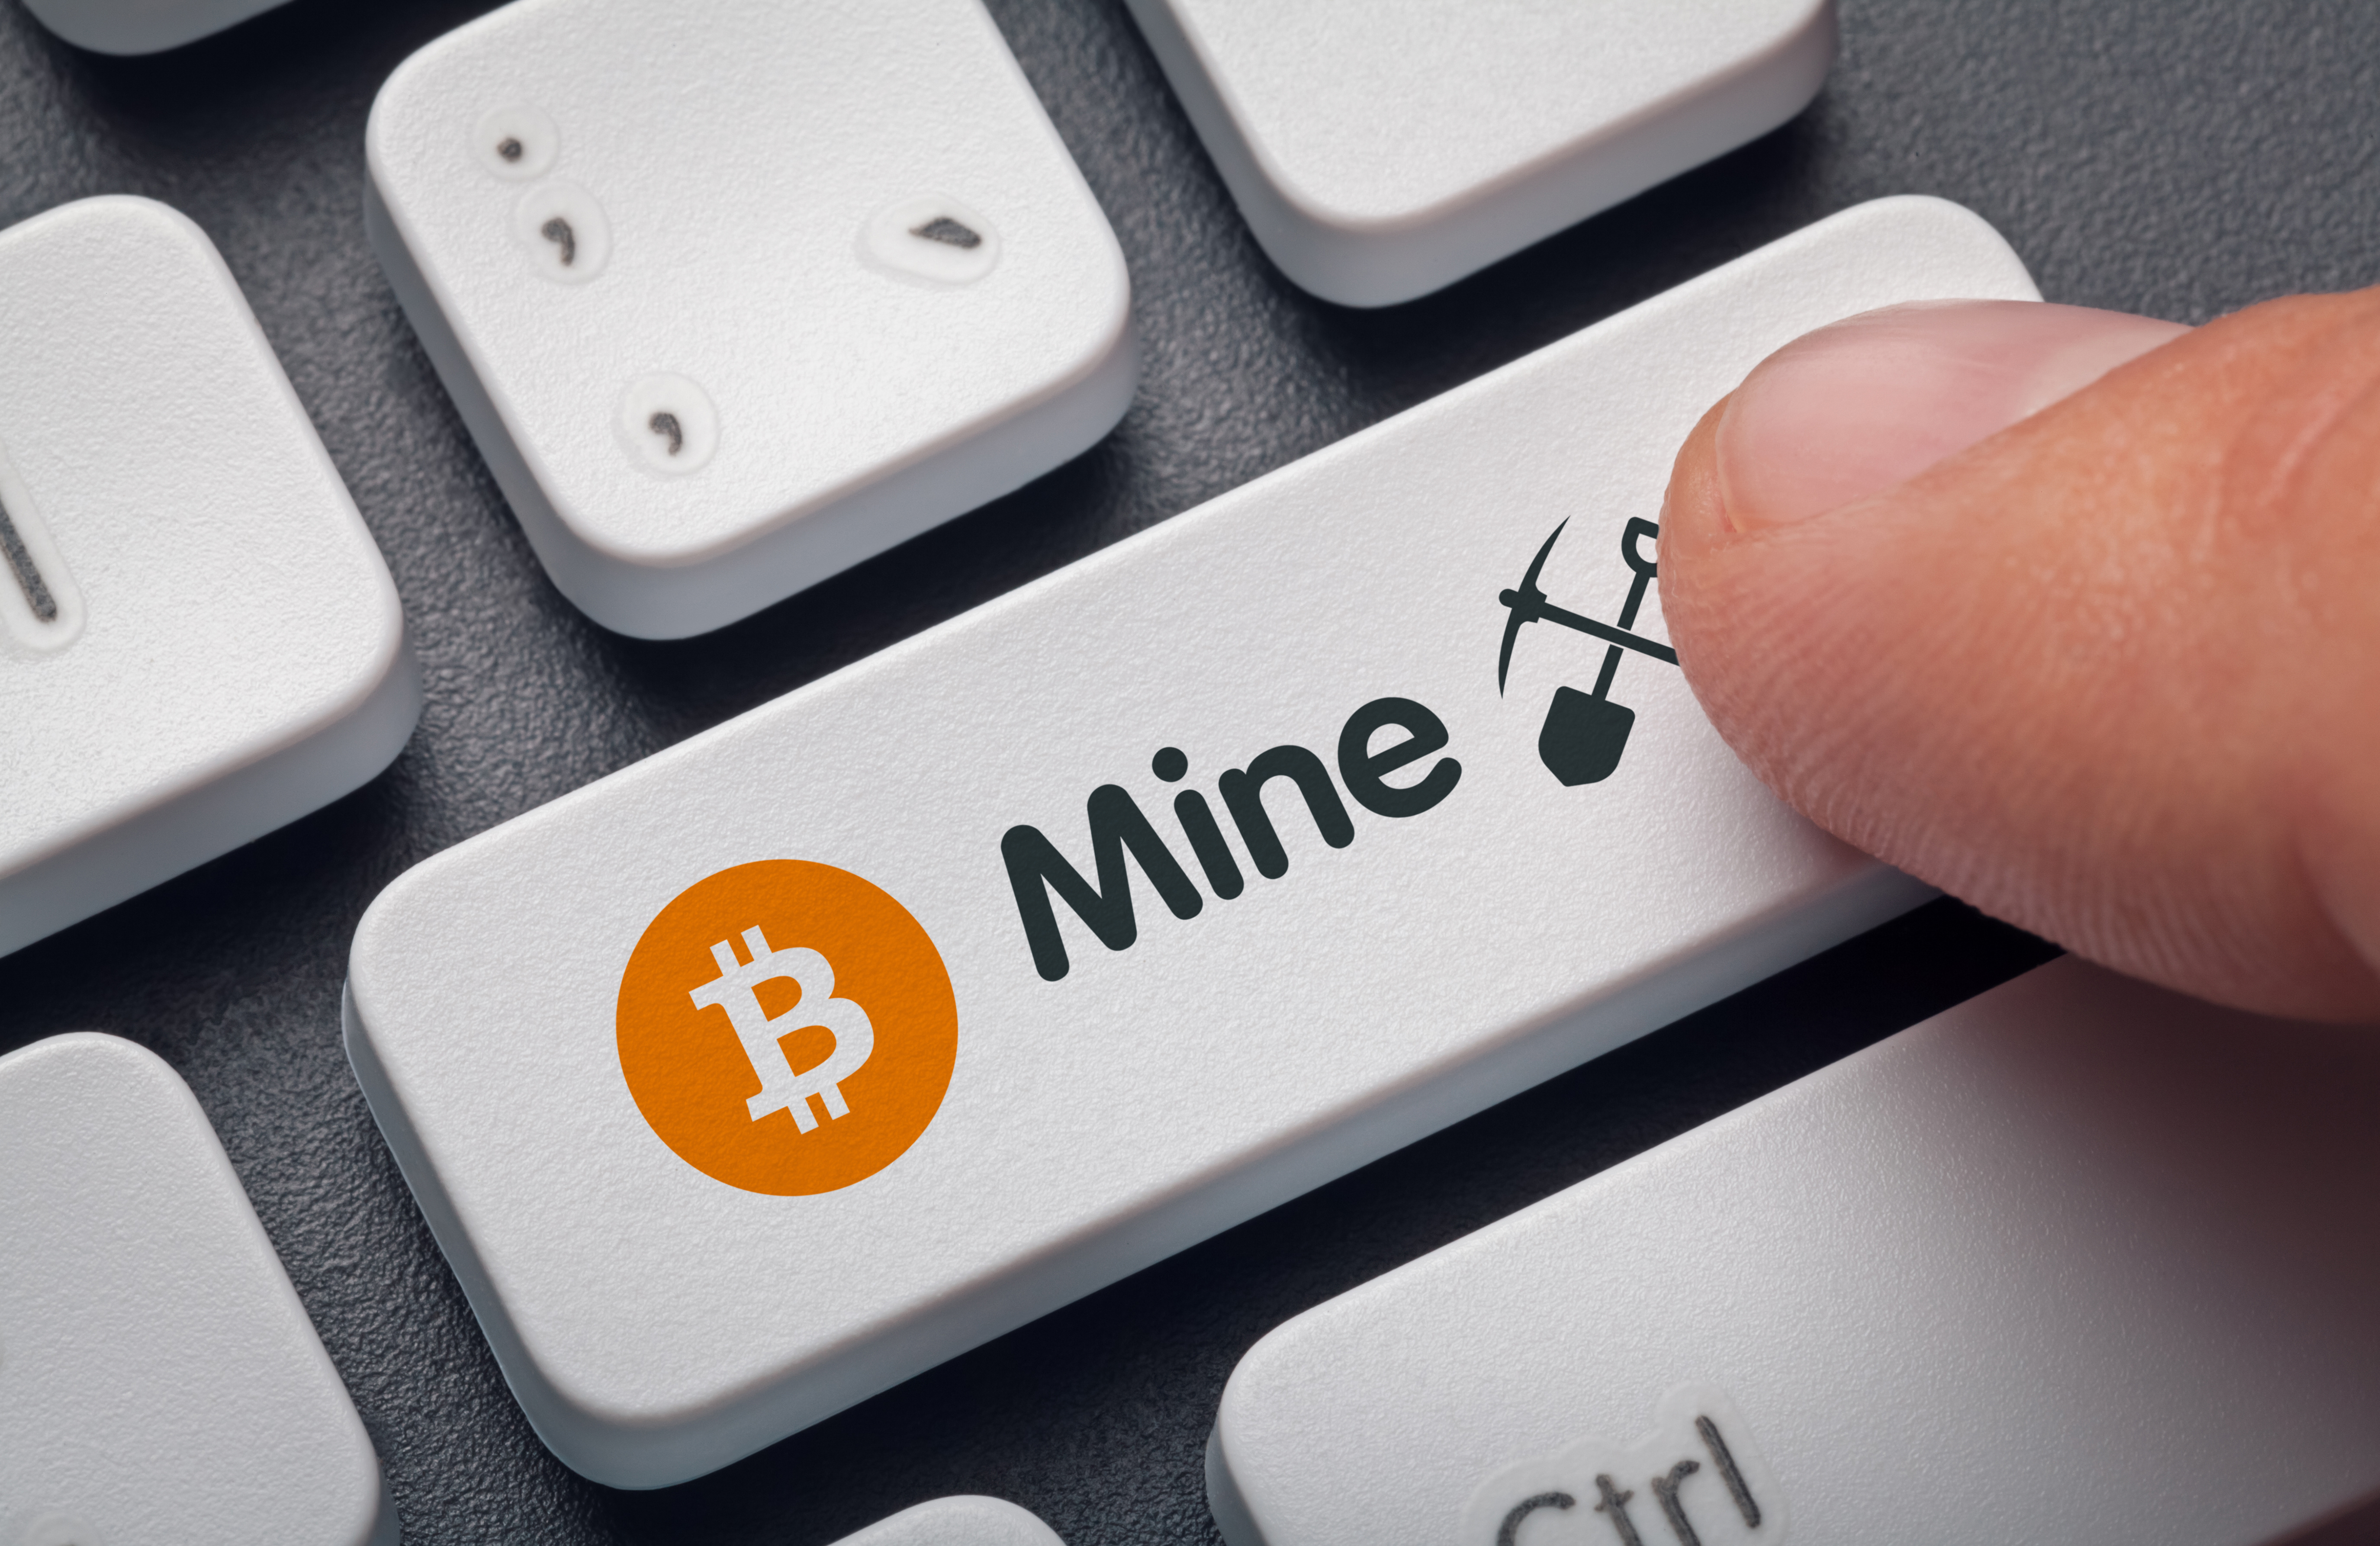 A person's finger presses a computer keyboard key.  The key is decorated with a symbol representing Bitcoin, as well as the word “mine”  and drawings of hoe and spade.